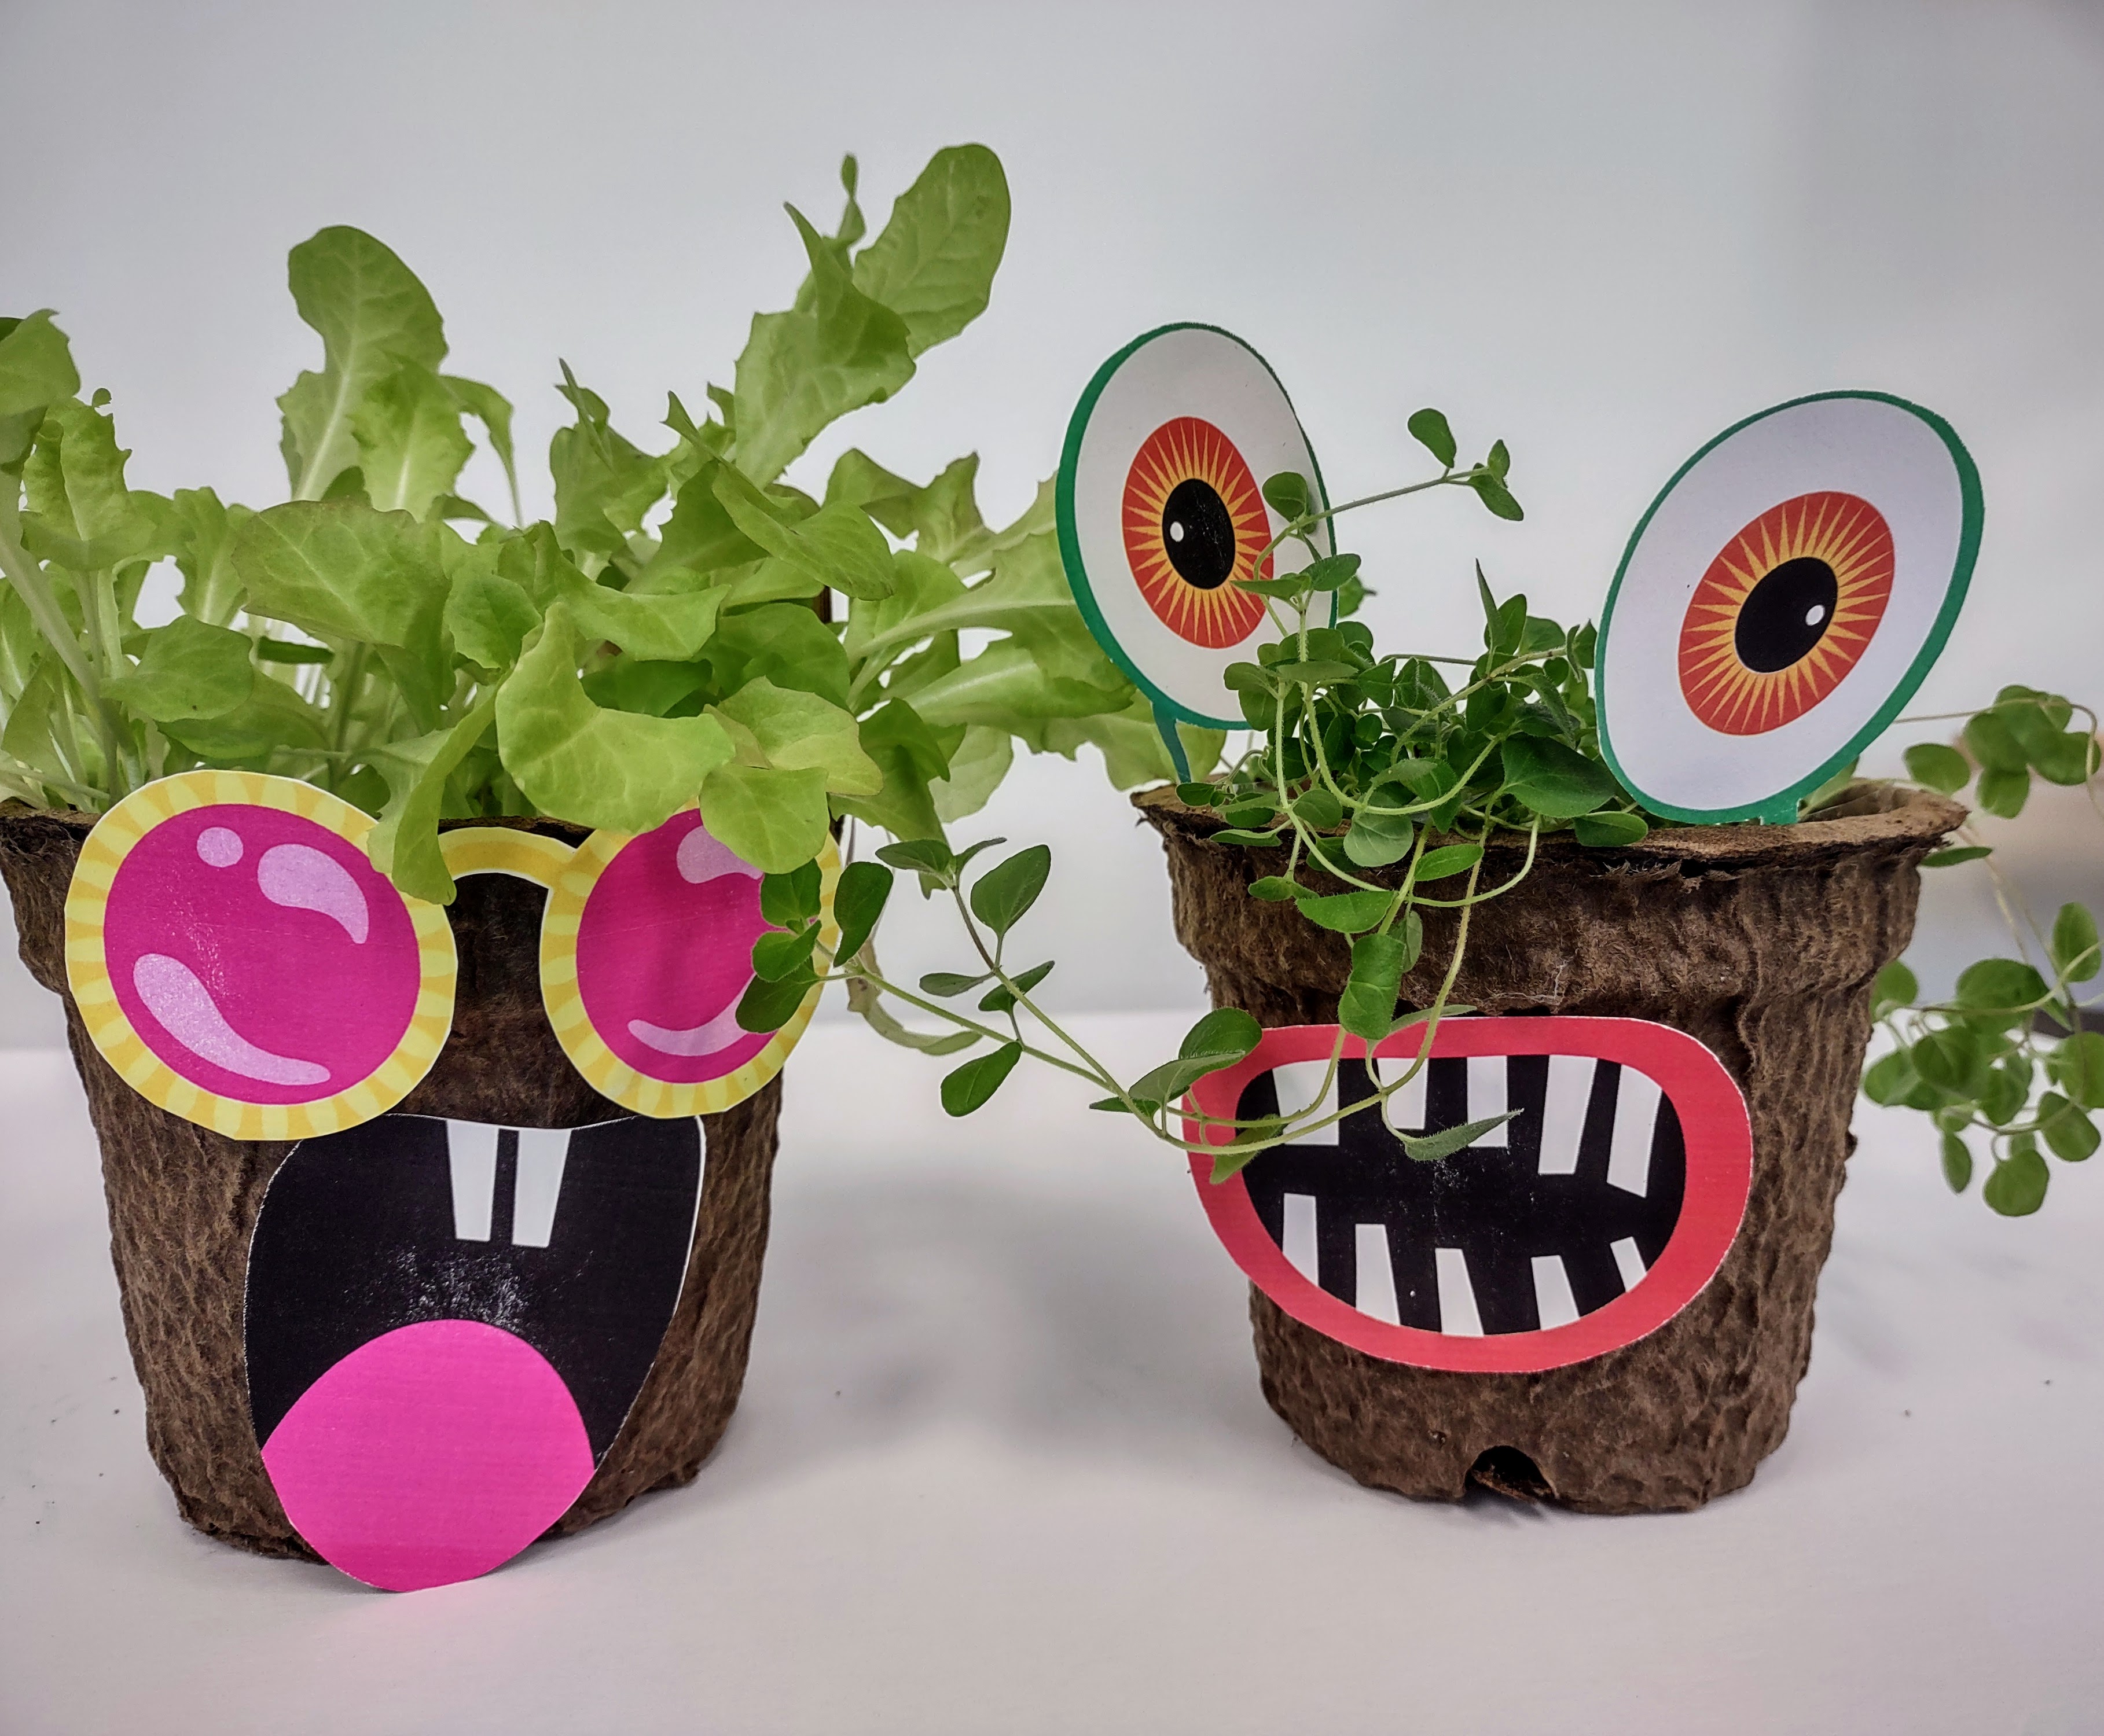 Kids garden containers that look like monsters with lettuce and oregano growing.